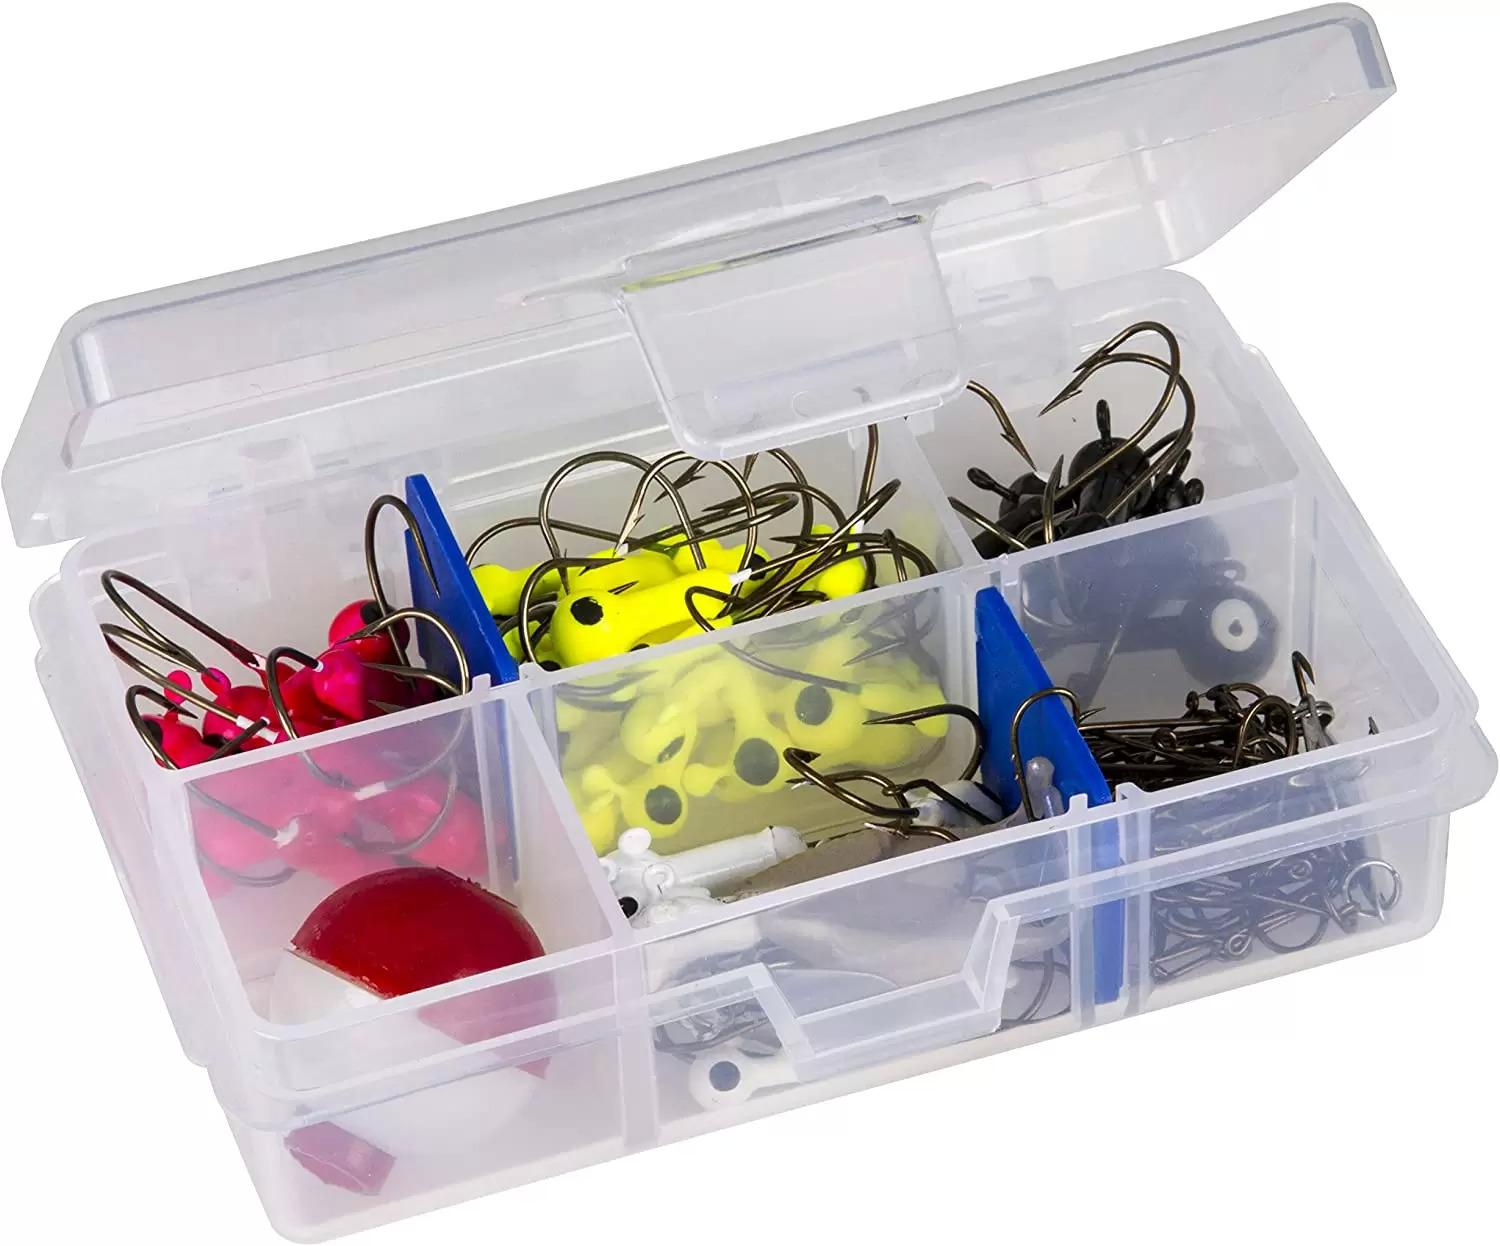 Flambeau Outdoors 1002 Tuff Tainer Fishing Tackle Tray Box for $1.64